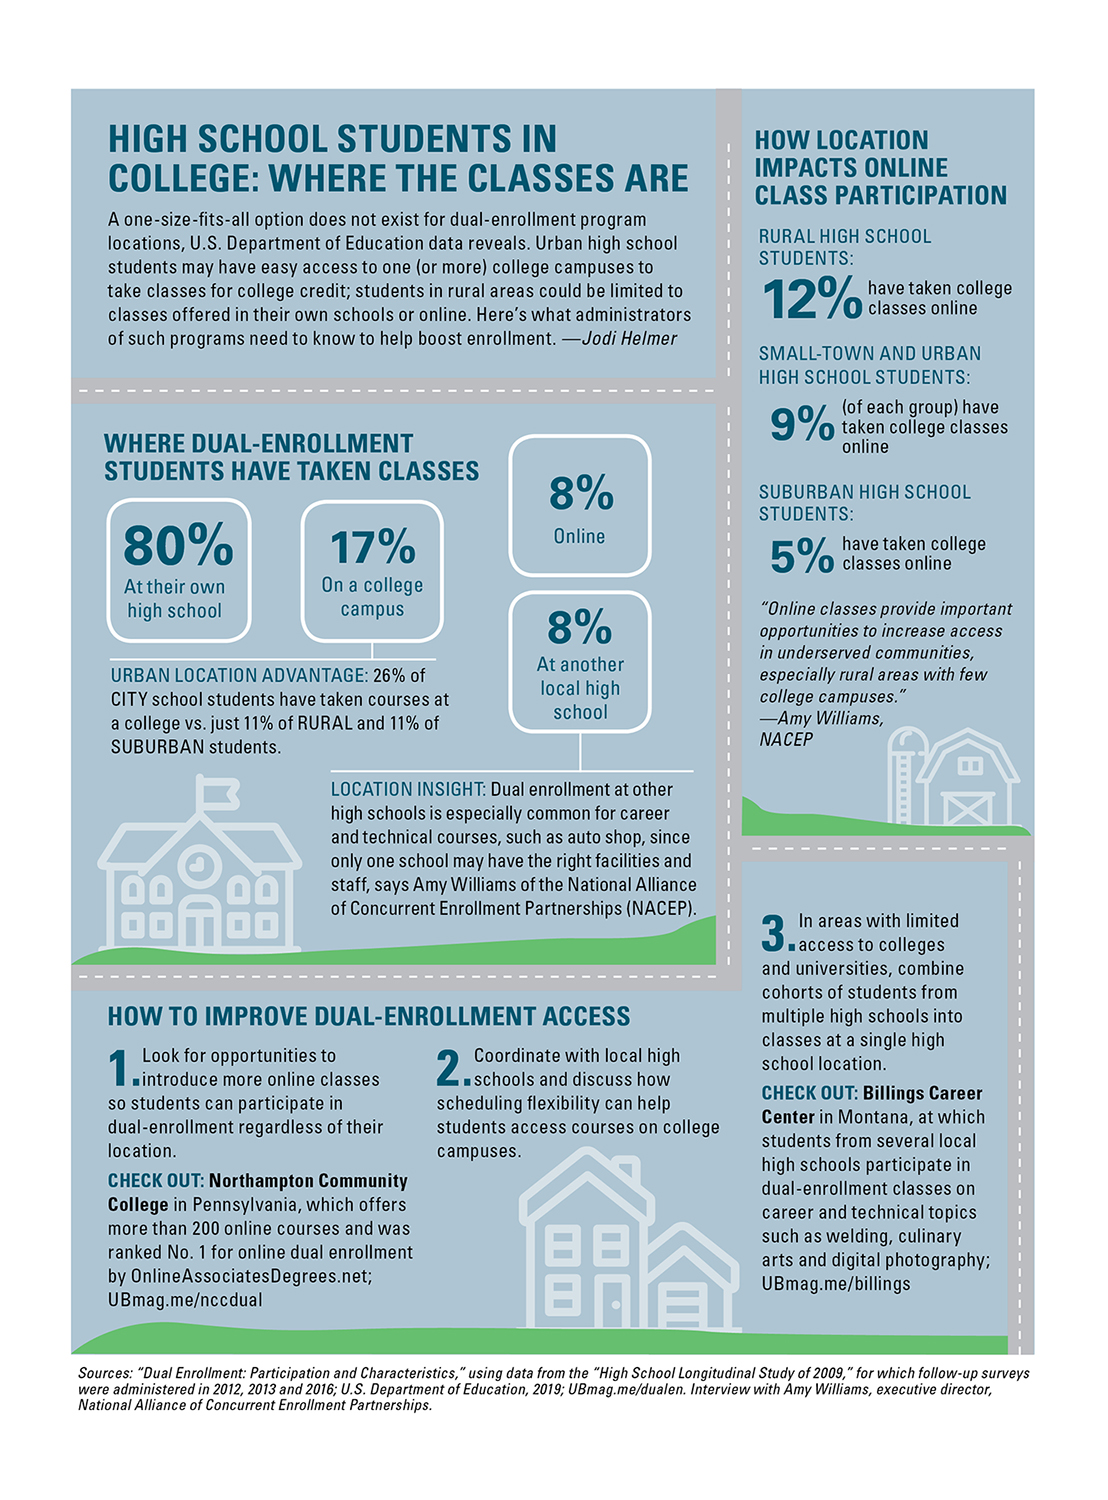 Dual-enrollment program location impacts access and enrollment. (Click on image to enlarge infographic.)